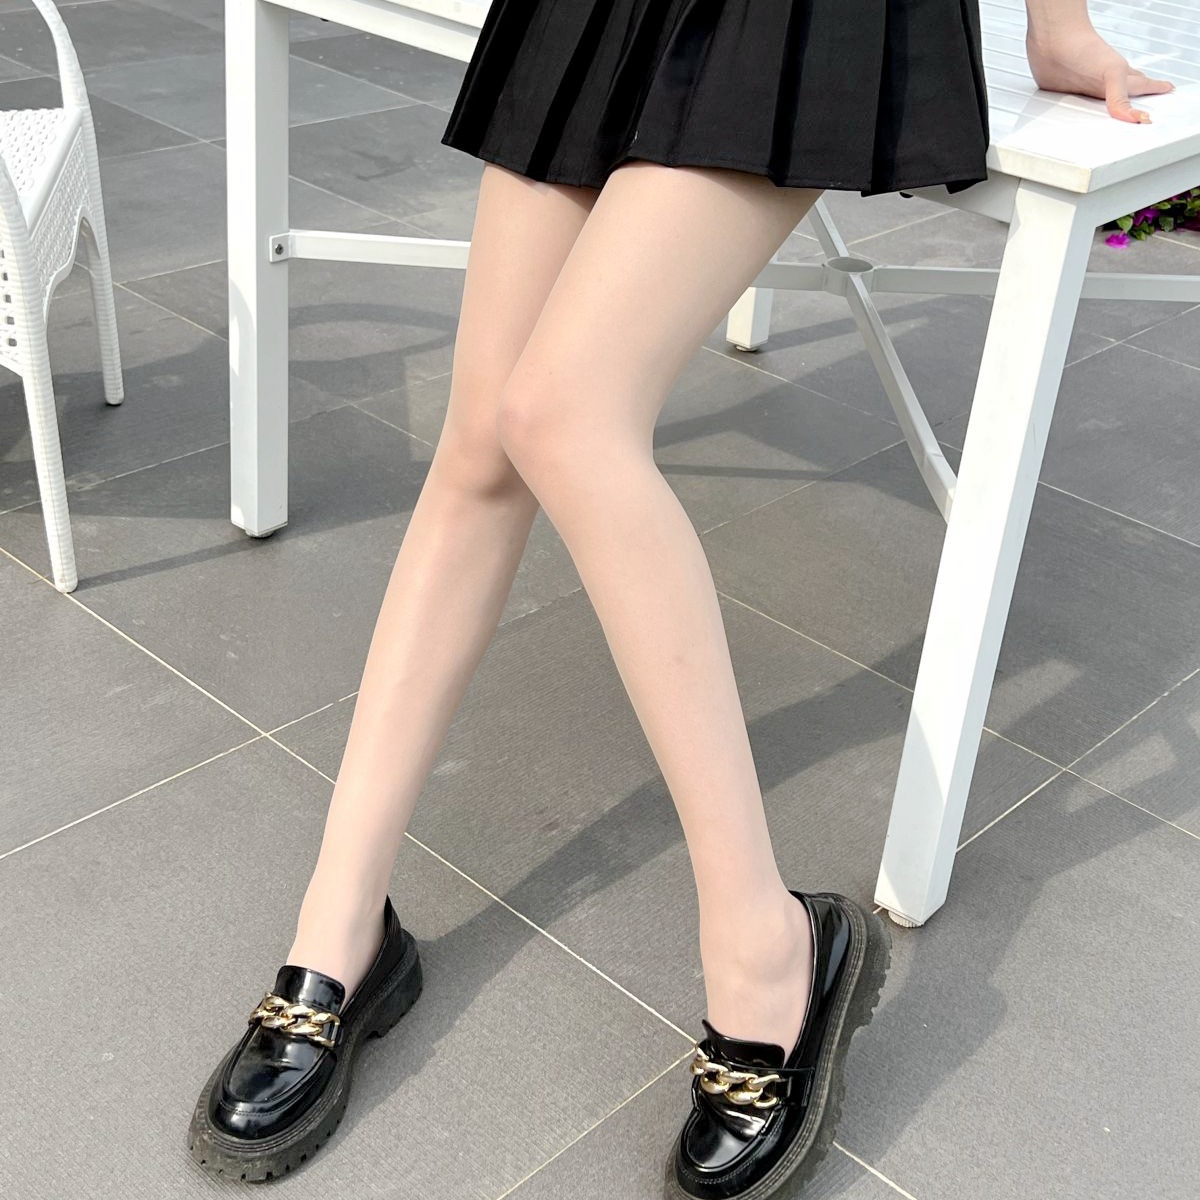 Huamuyan H123 Fourth Generation Thin Stockings Sexy Silky Toe Transparent 165-185cm Lengthened Front-Line Crotch